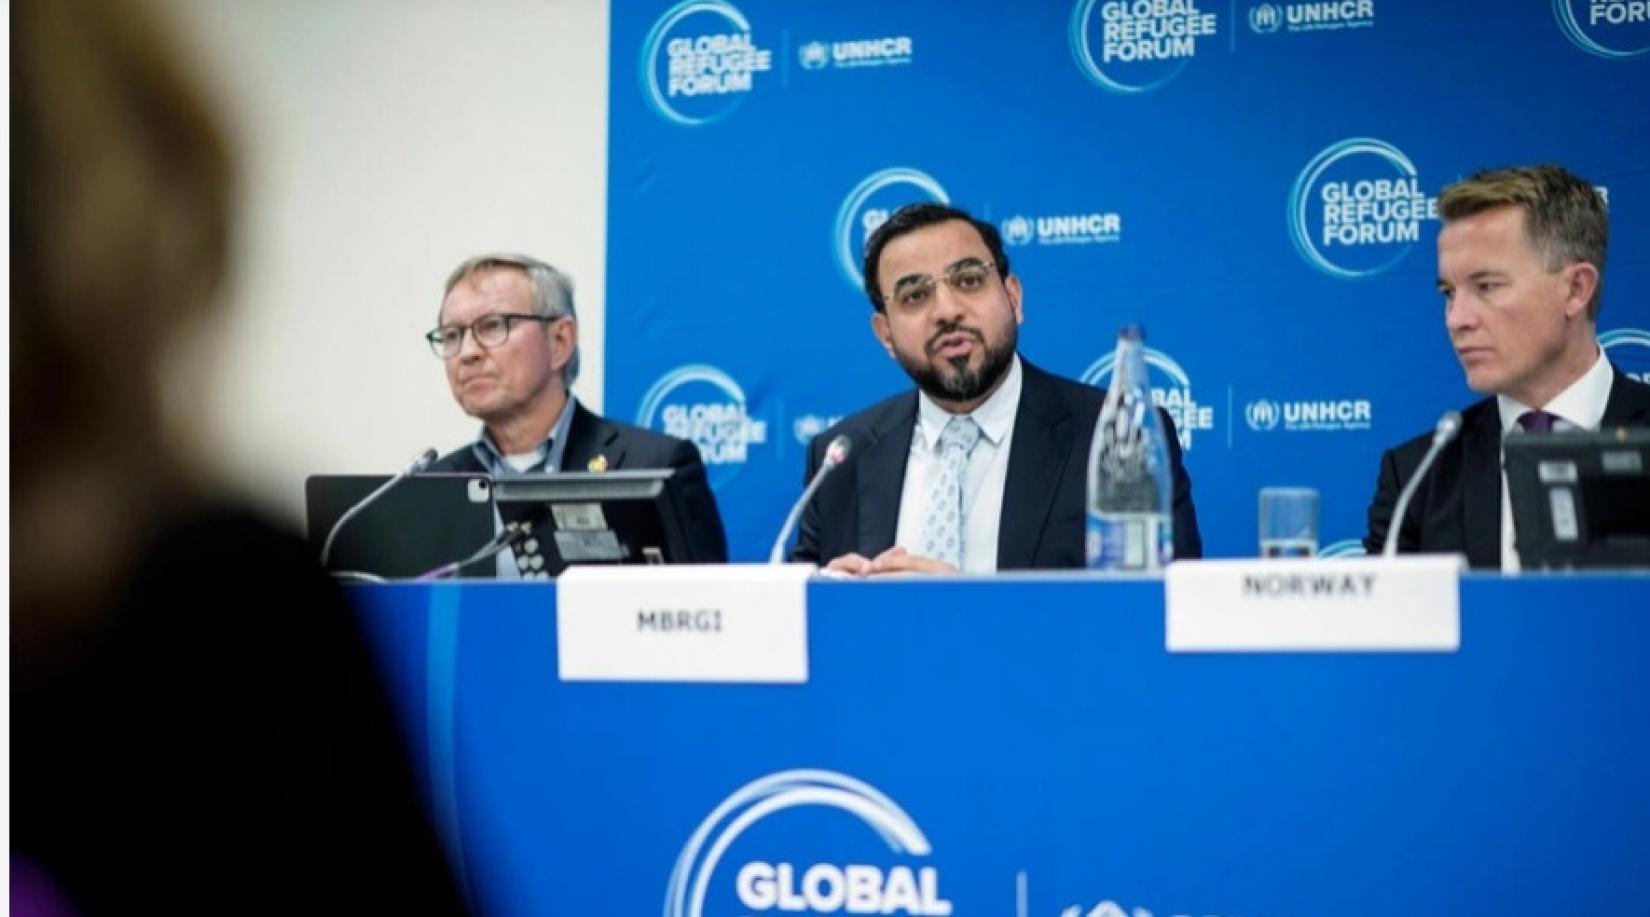 His Excellency Saeed Al Eter, the Assistant Secretary-General of the Mohammed bin Rashid Al Maktoum Global Initiatives, announced the commitment of the foundation during a session held on the sidelines of the Global Refugee Forum in Geneva.